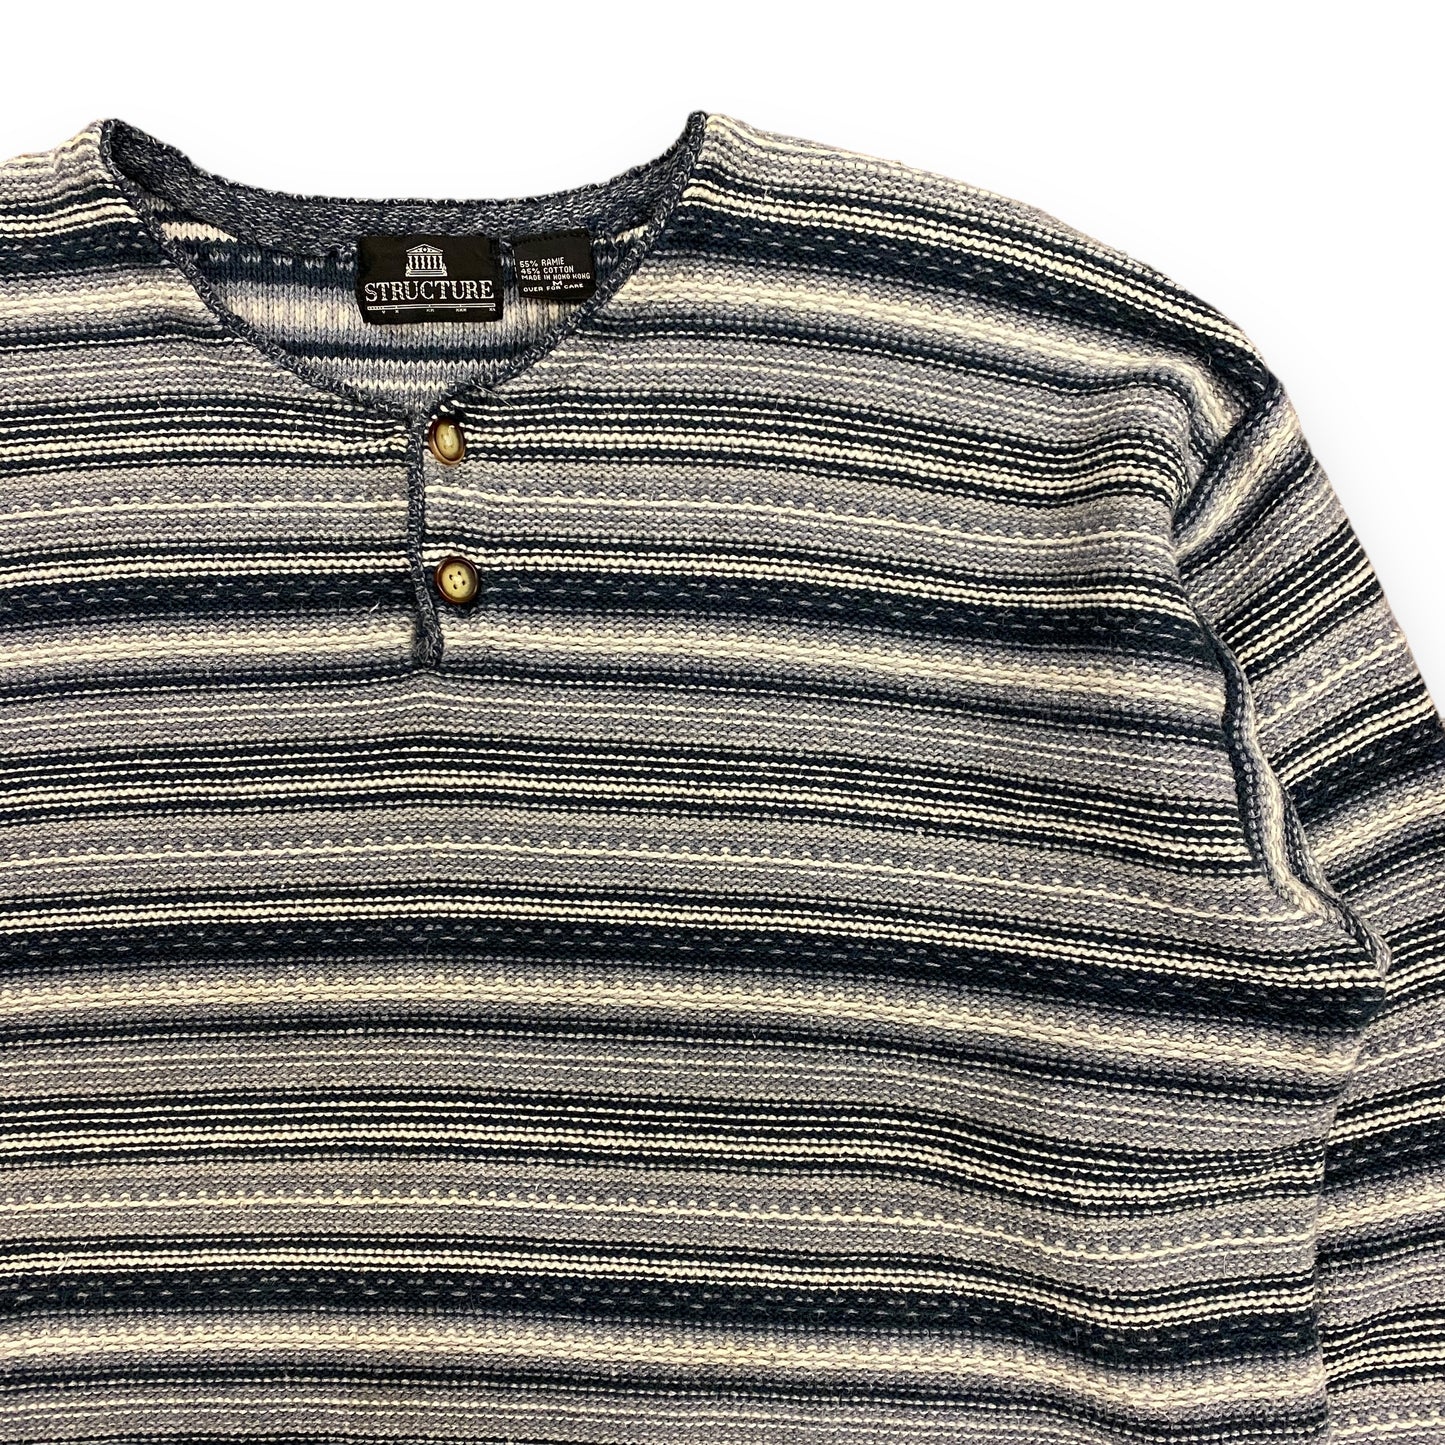 1990s Structure Navy Blue Striped Knit Henley Sweater - Size Medium